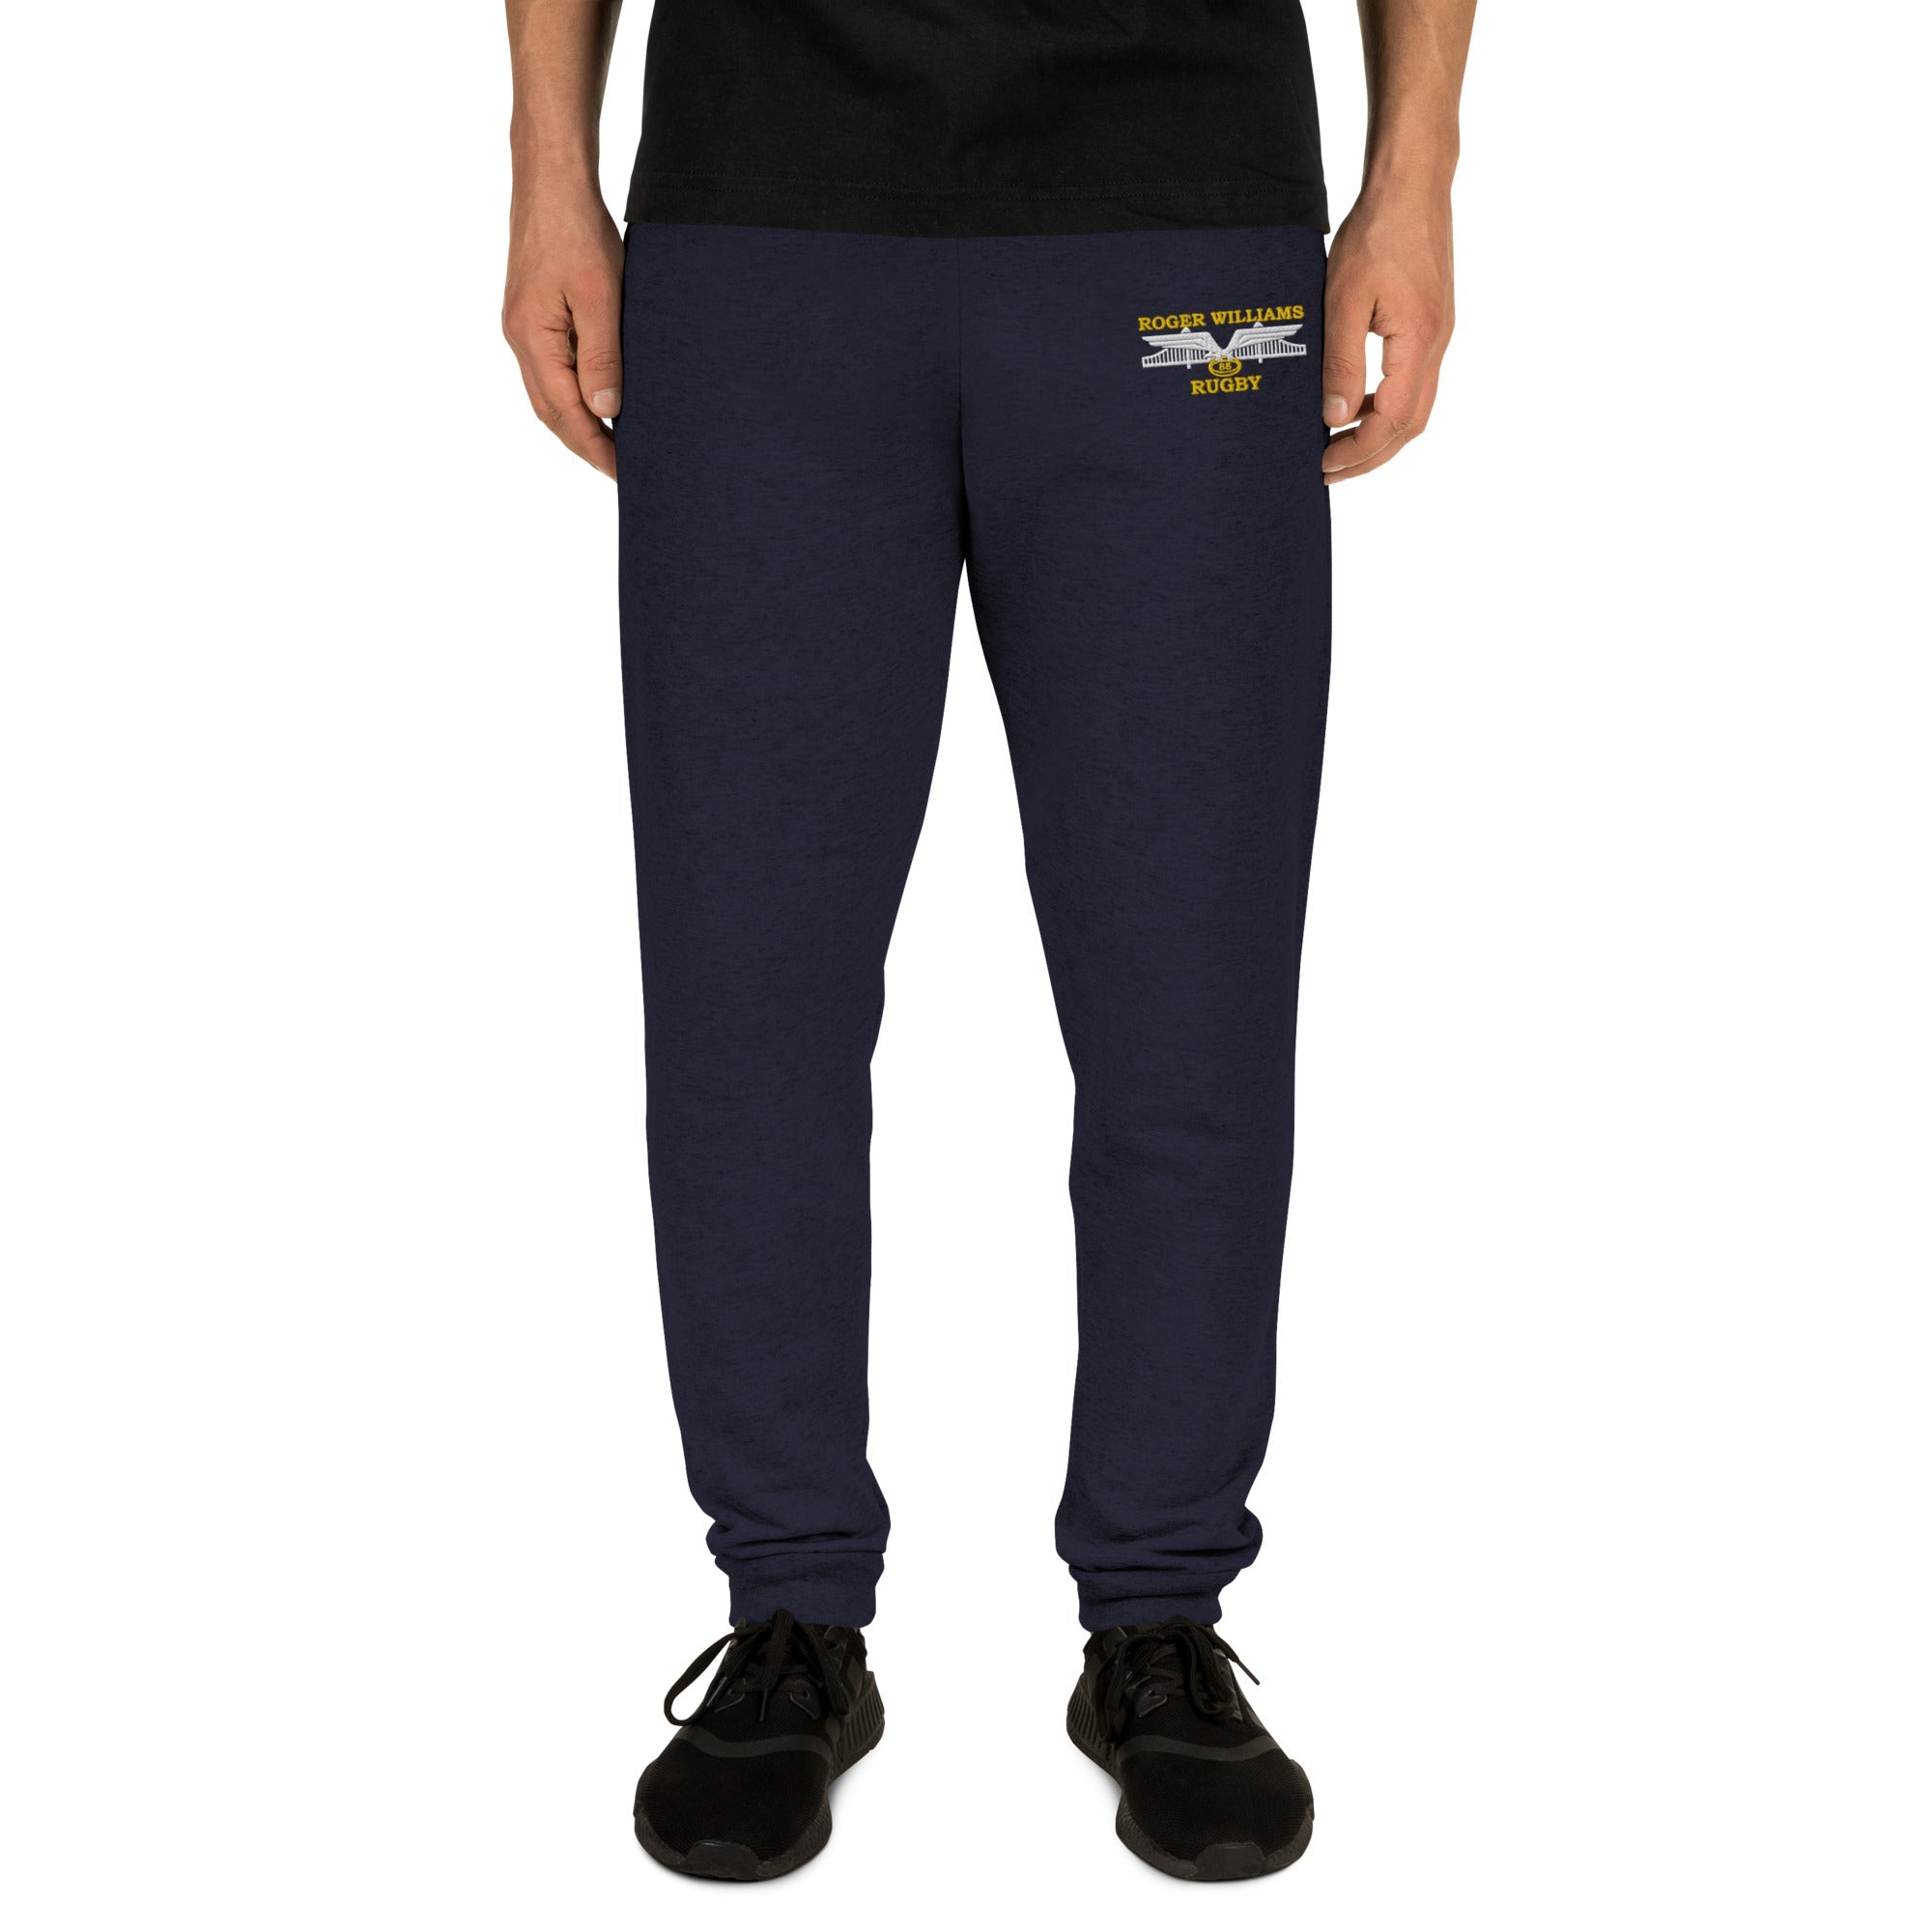 Rugby Imports Roger Williams RFC Jogger Sweatpants